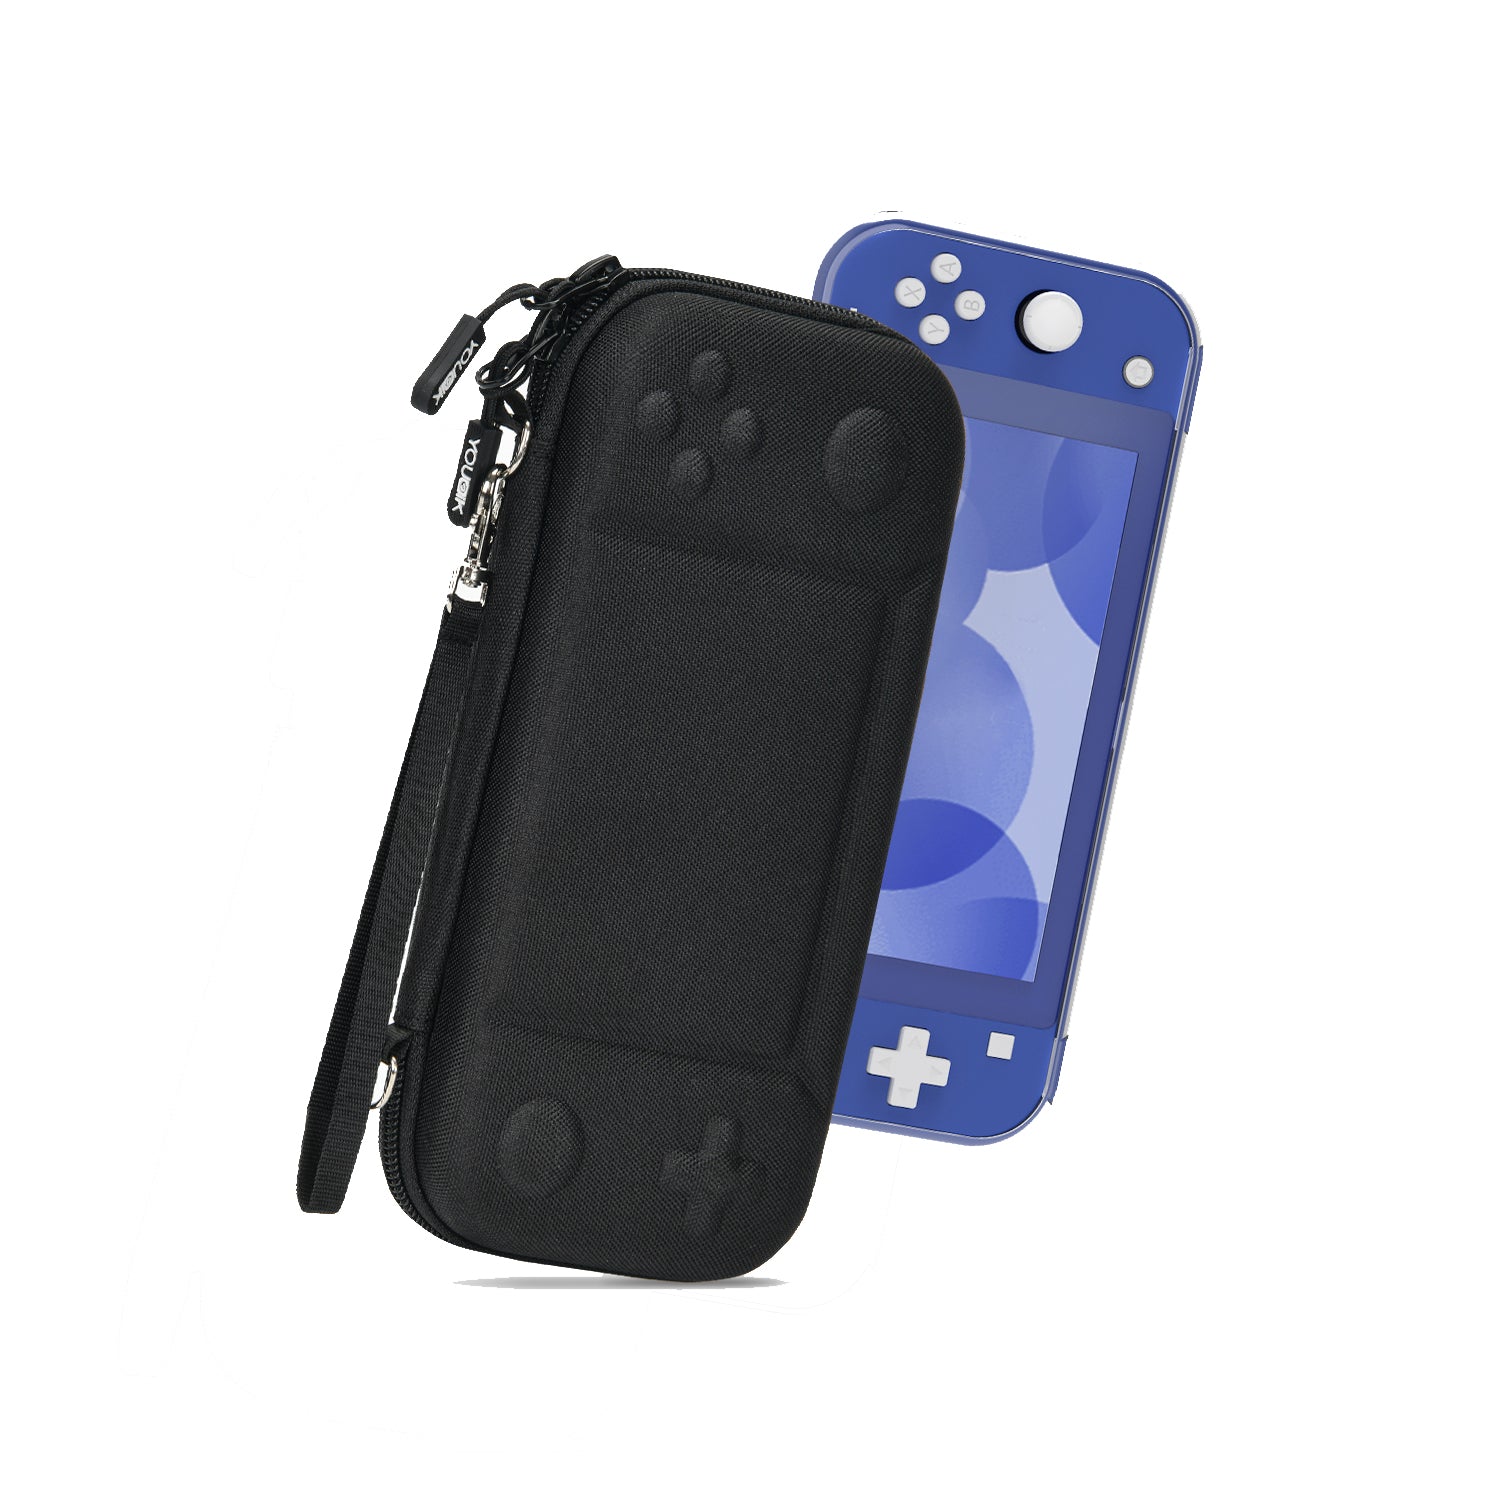 Younik Switch Lite Carrying Case, Protective Case for SwitchLite